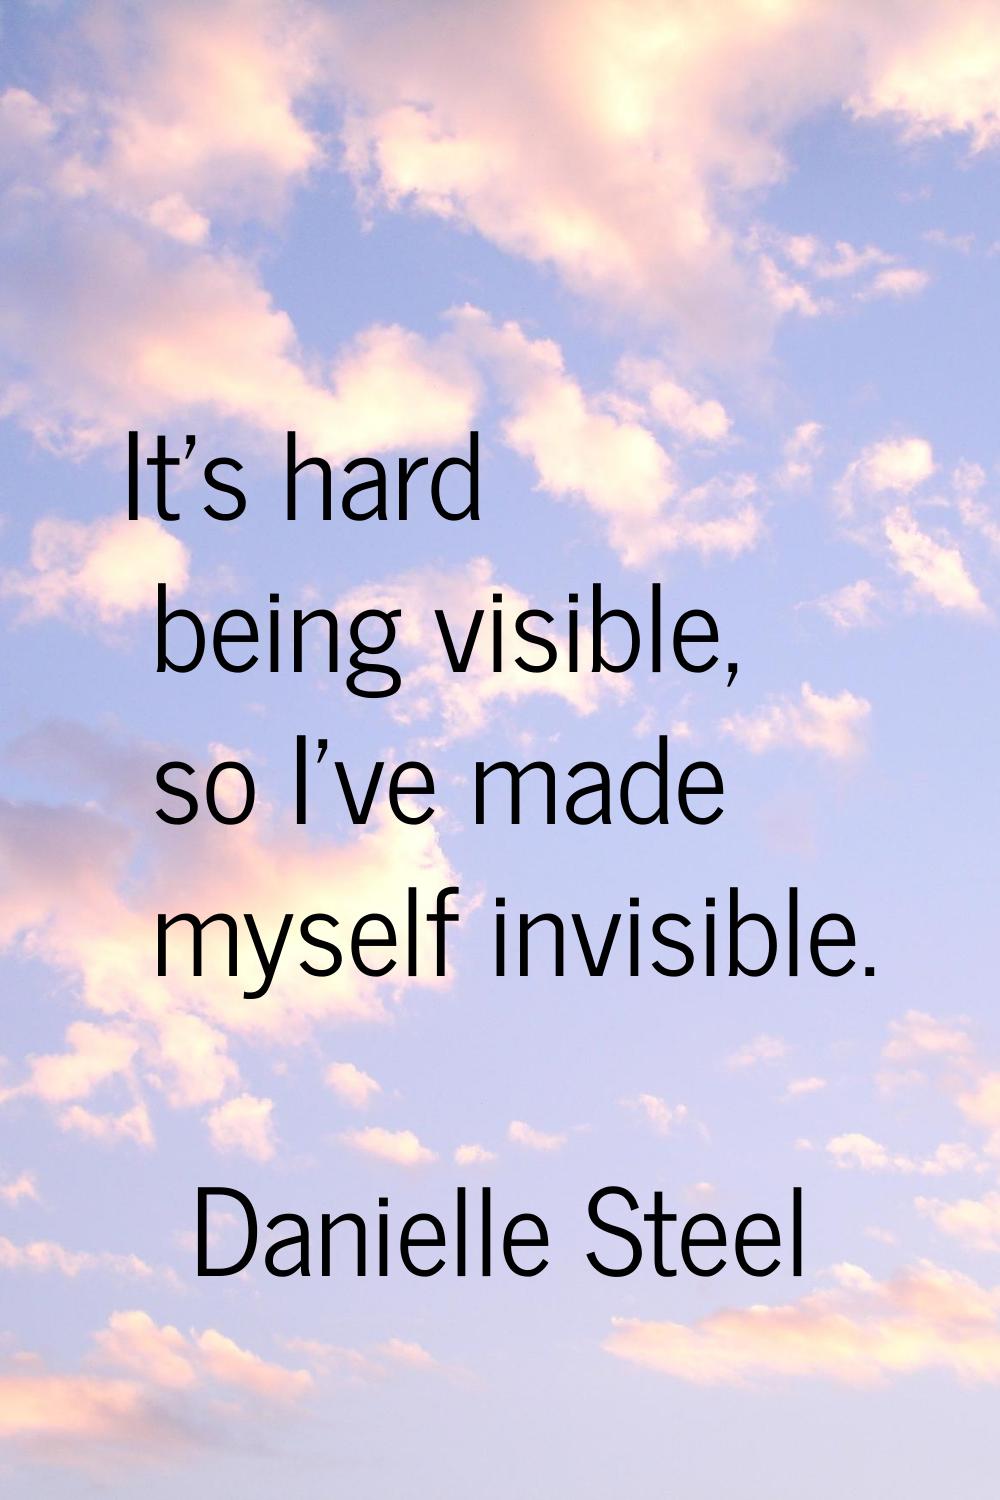 It's hard being visible, so I've made myself invisible.